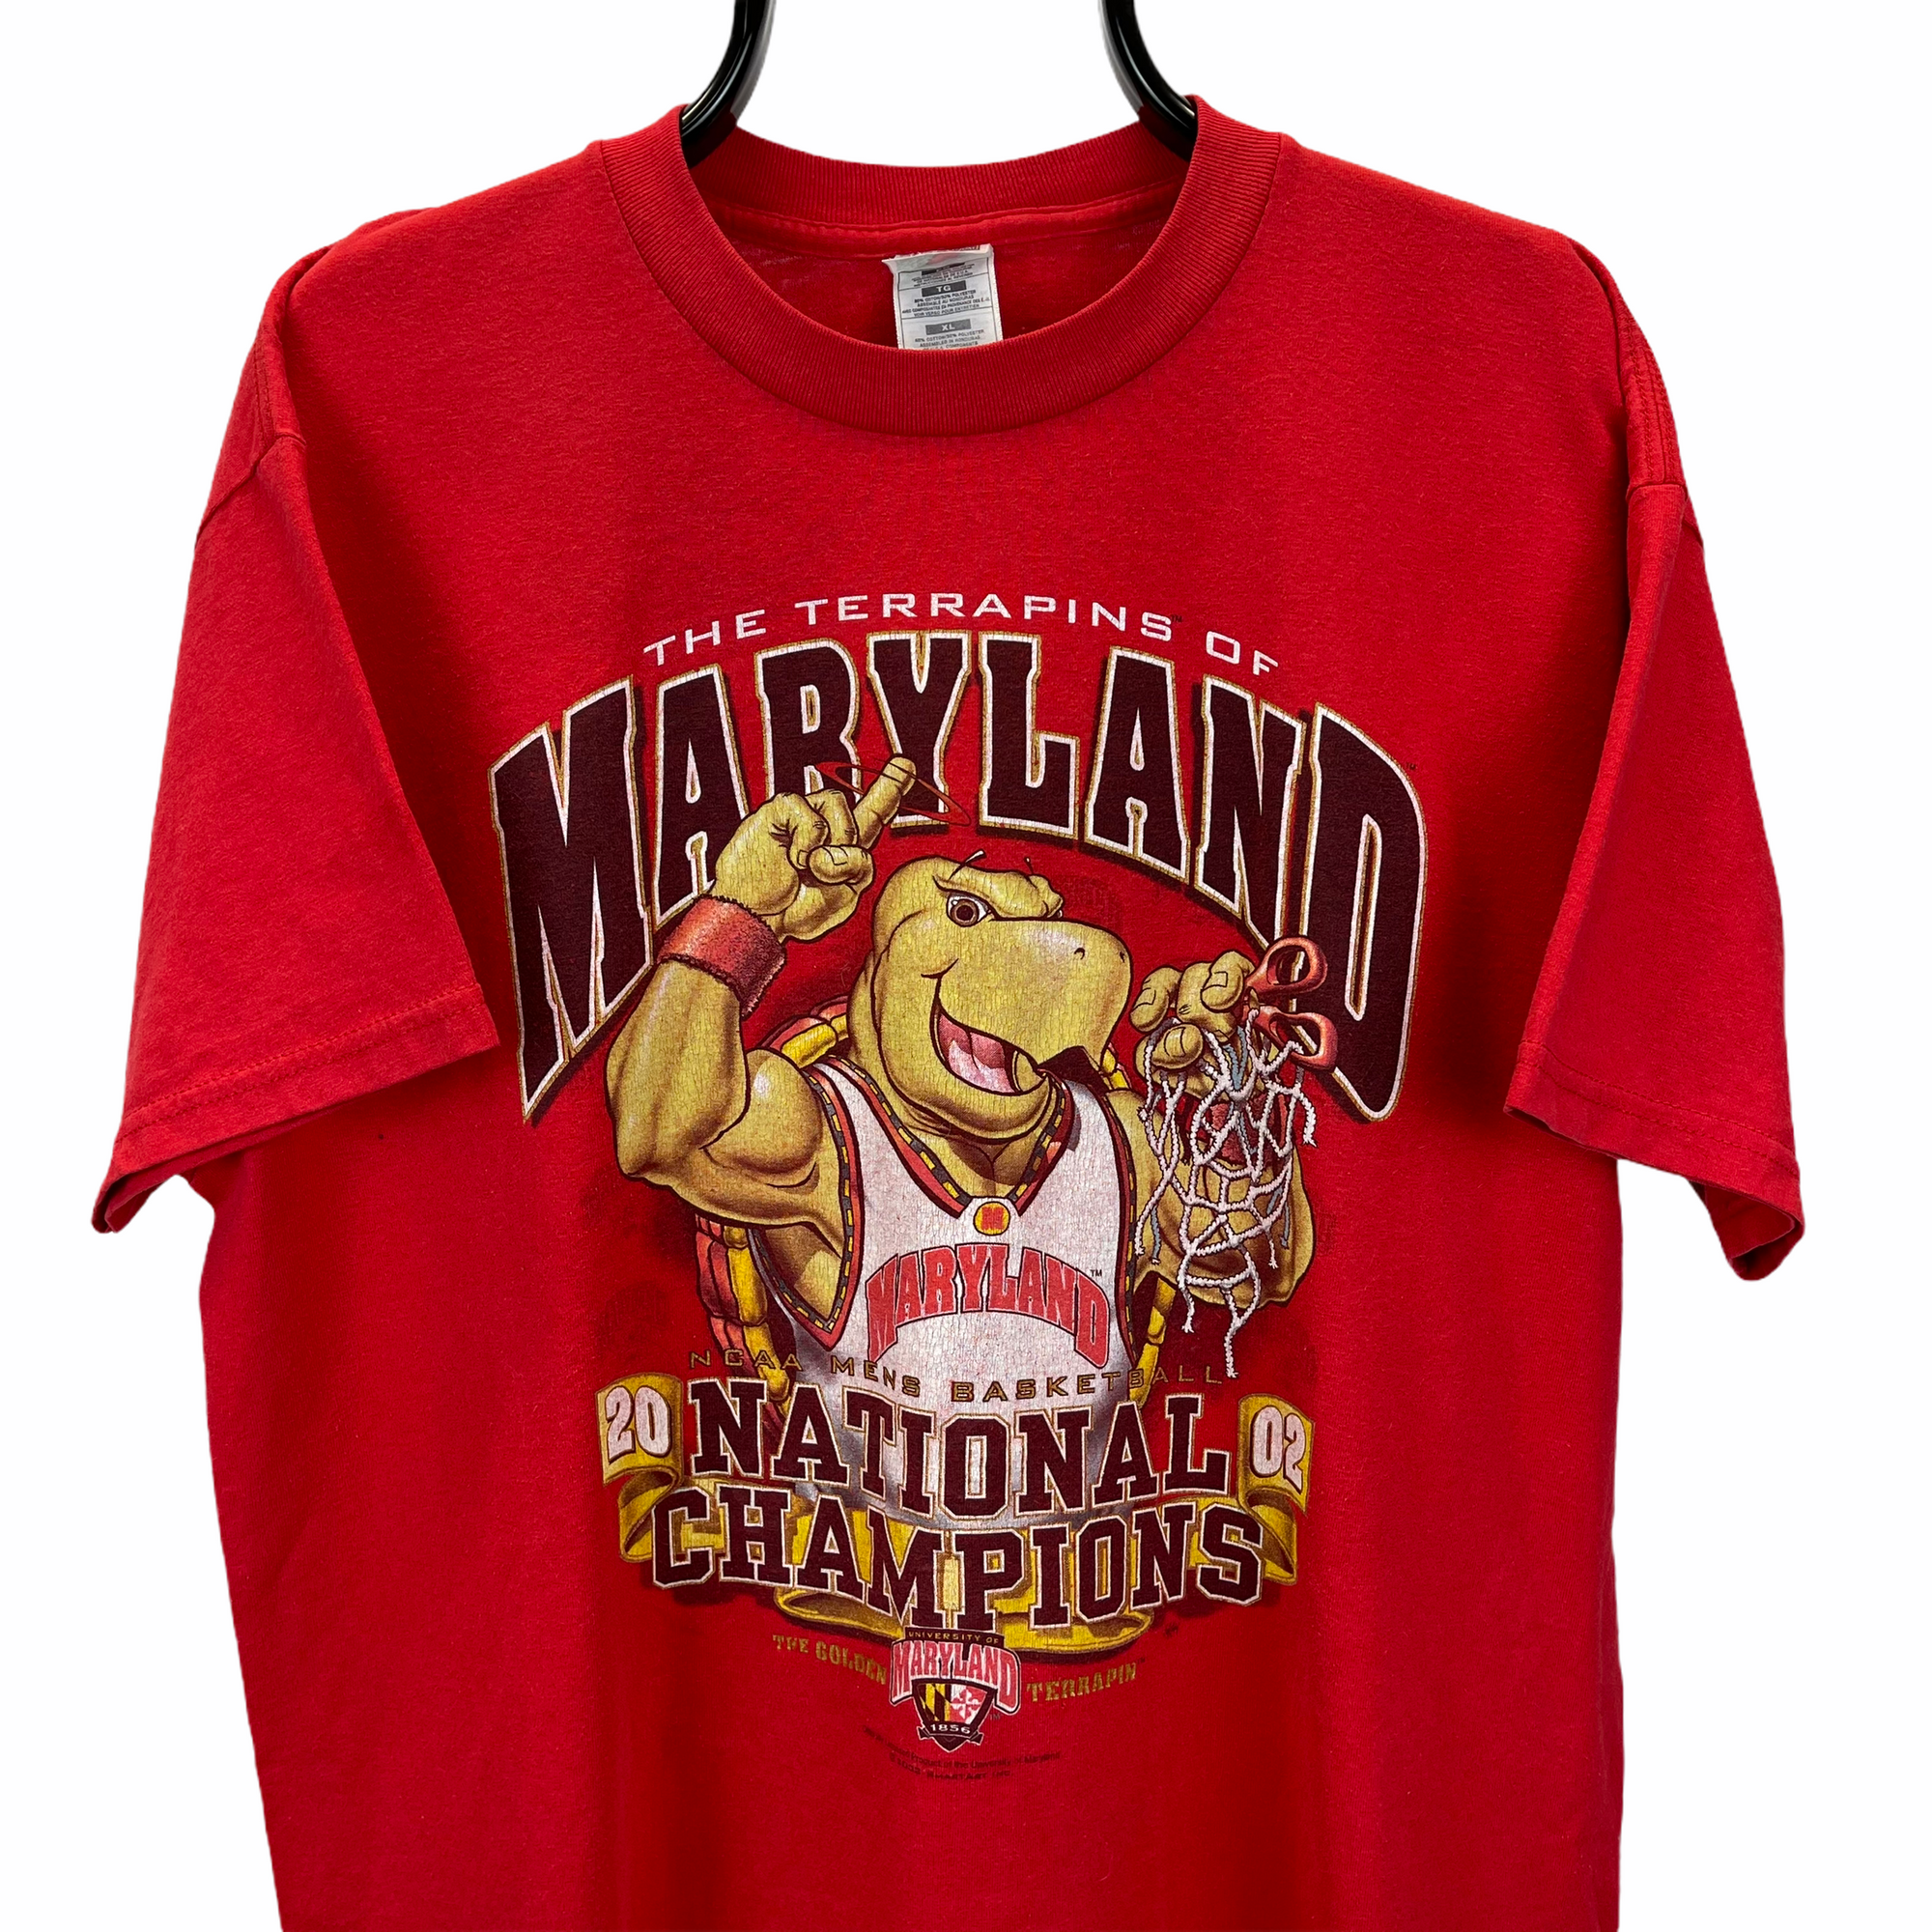 VINTAGE MARYLAND US COLLEGE TEE IN RED - MEN'S LARGE/WOMEN'S XL